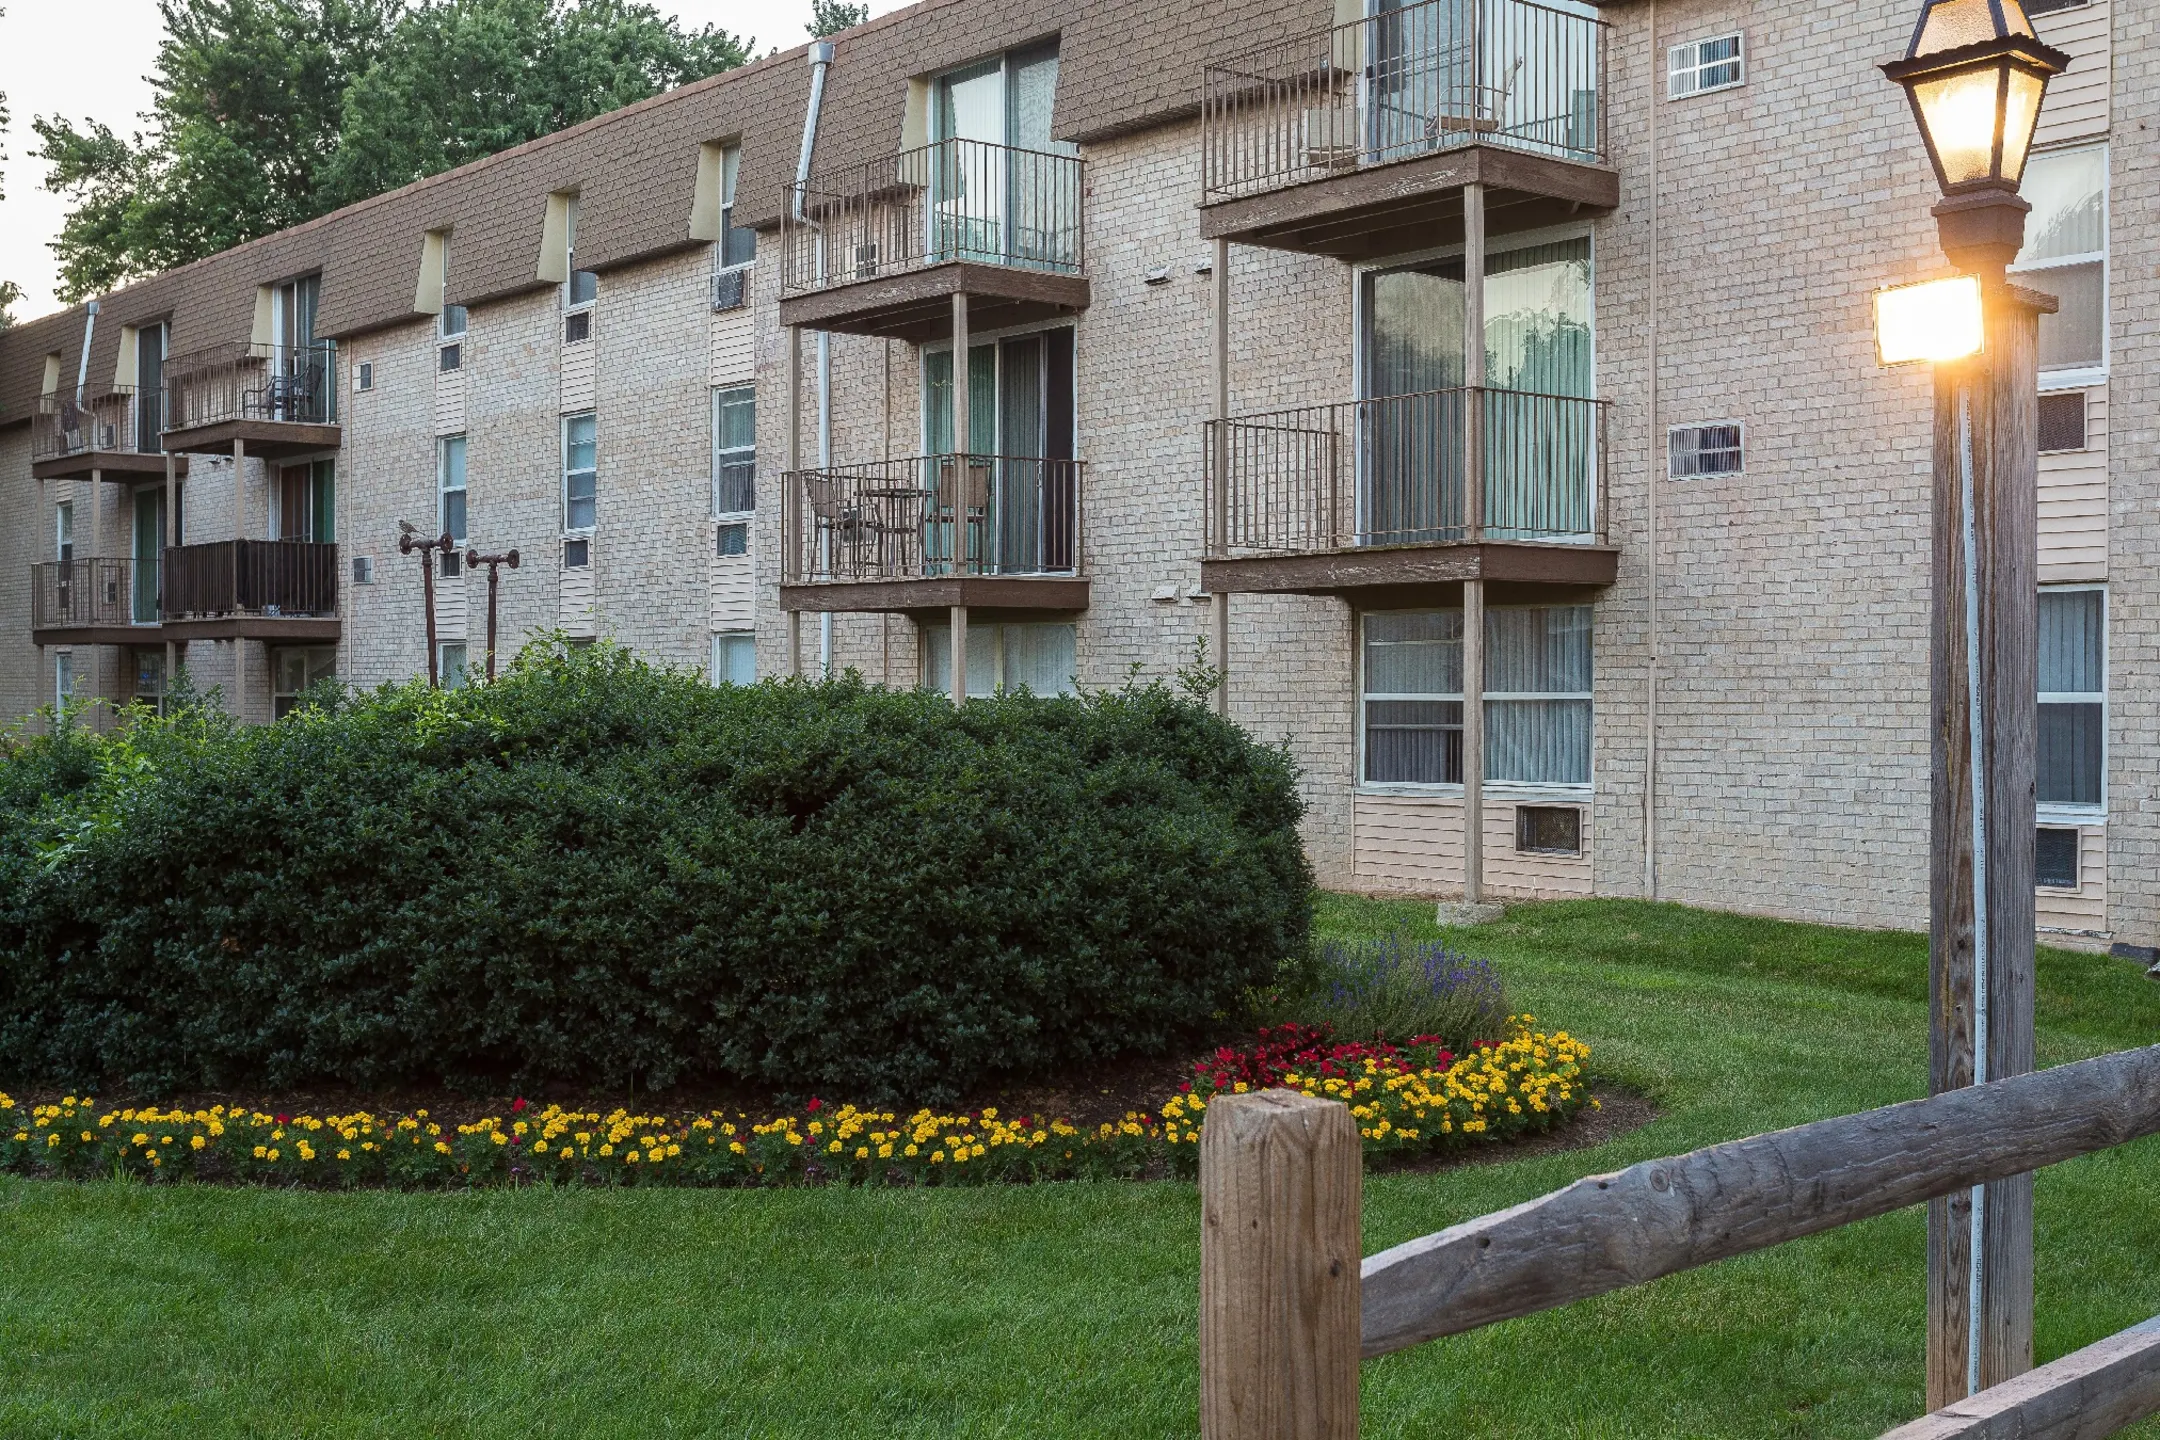 Building - 450 Green Apartments - Norristown, PA